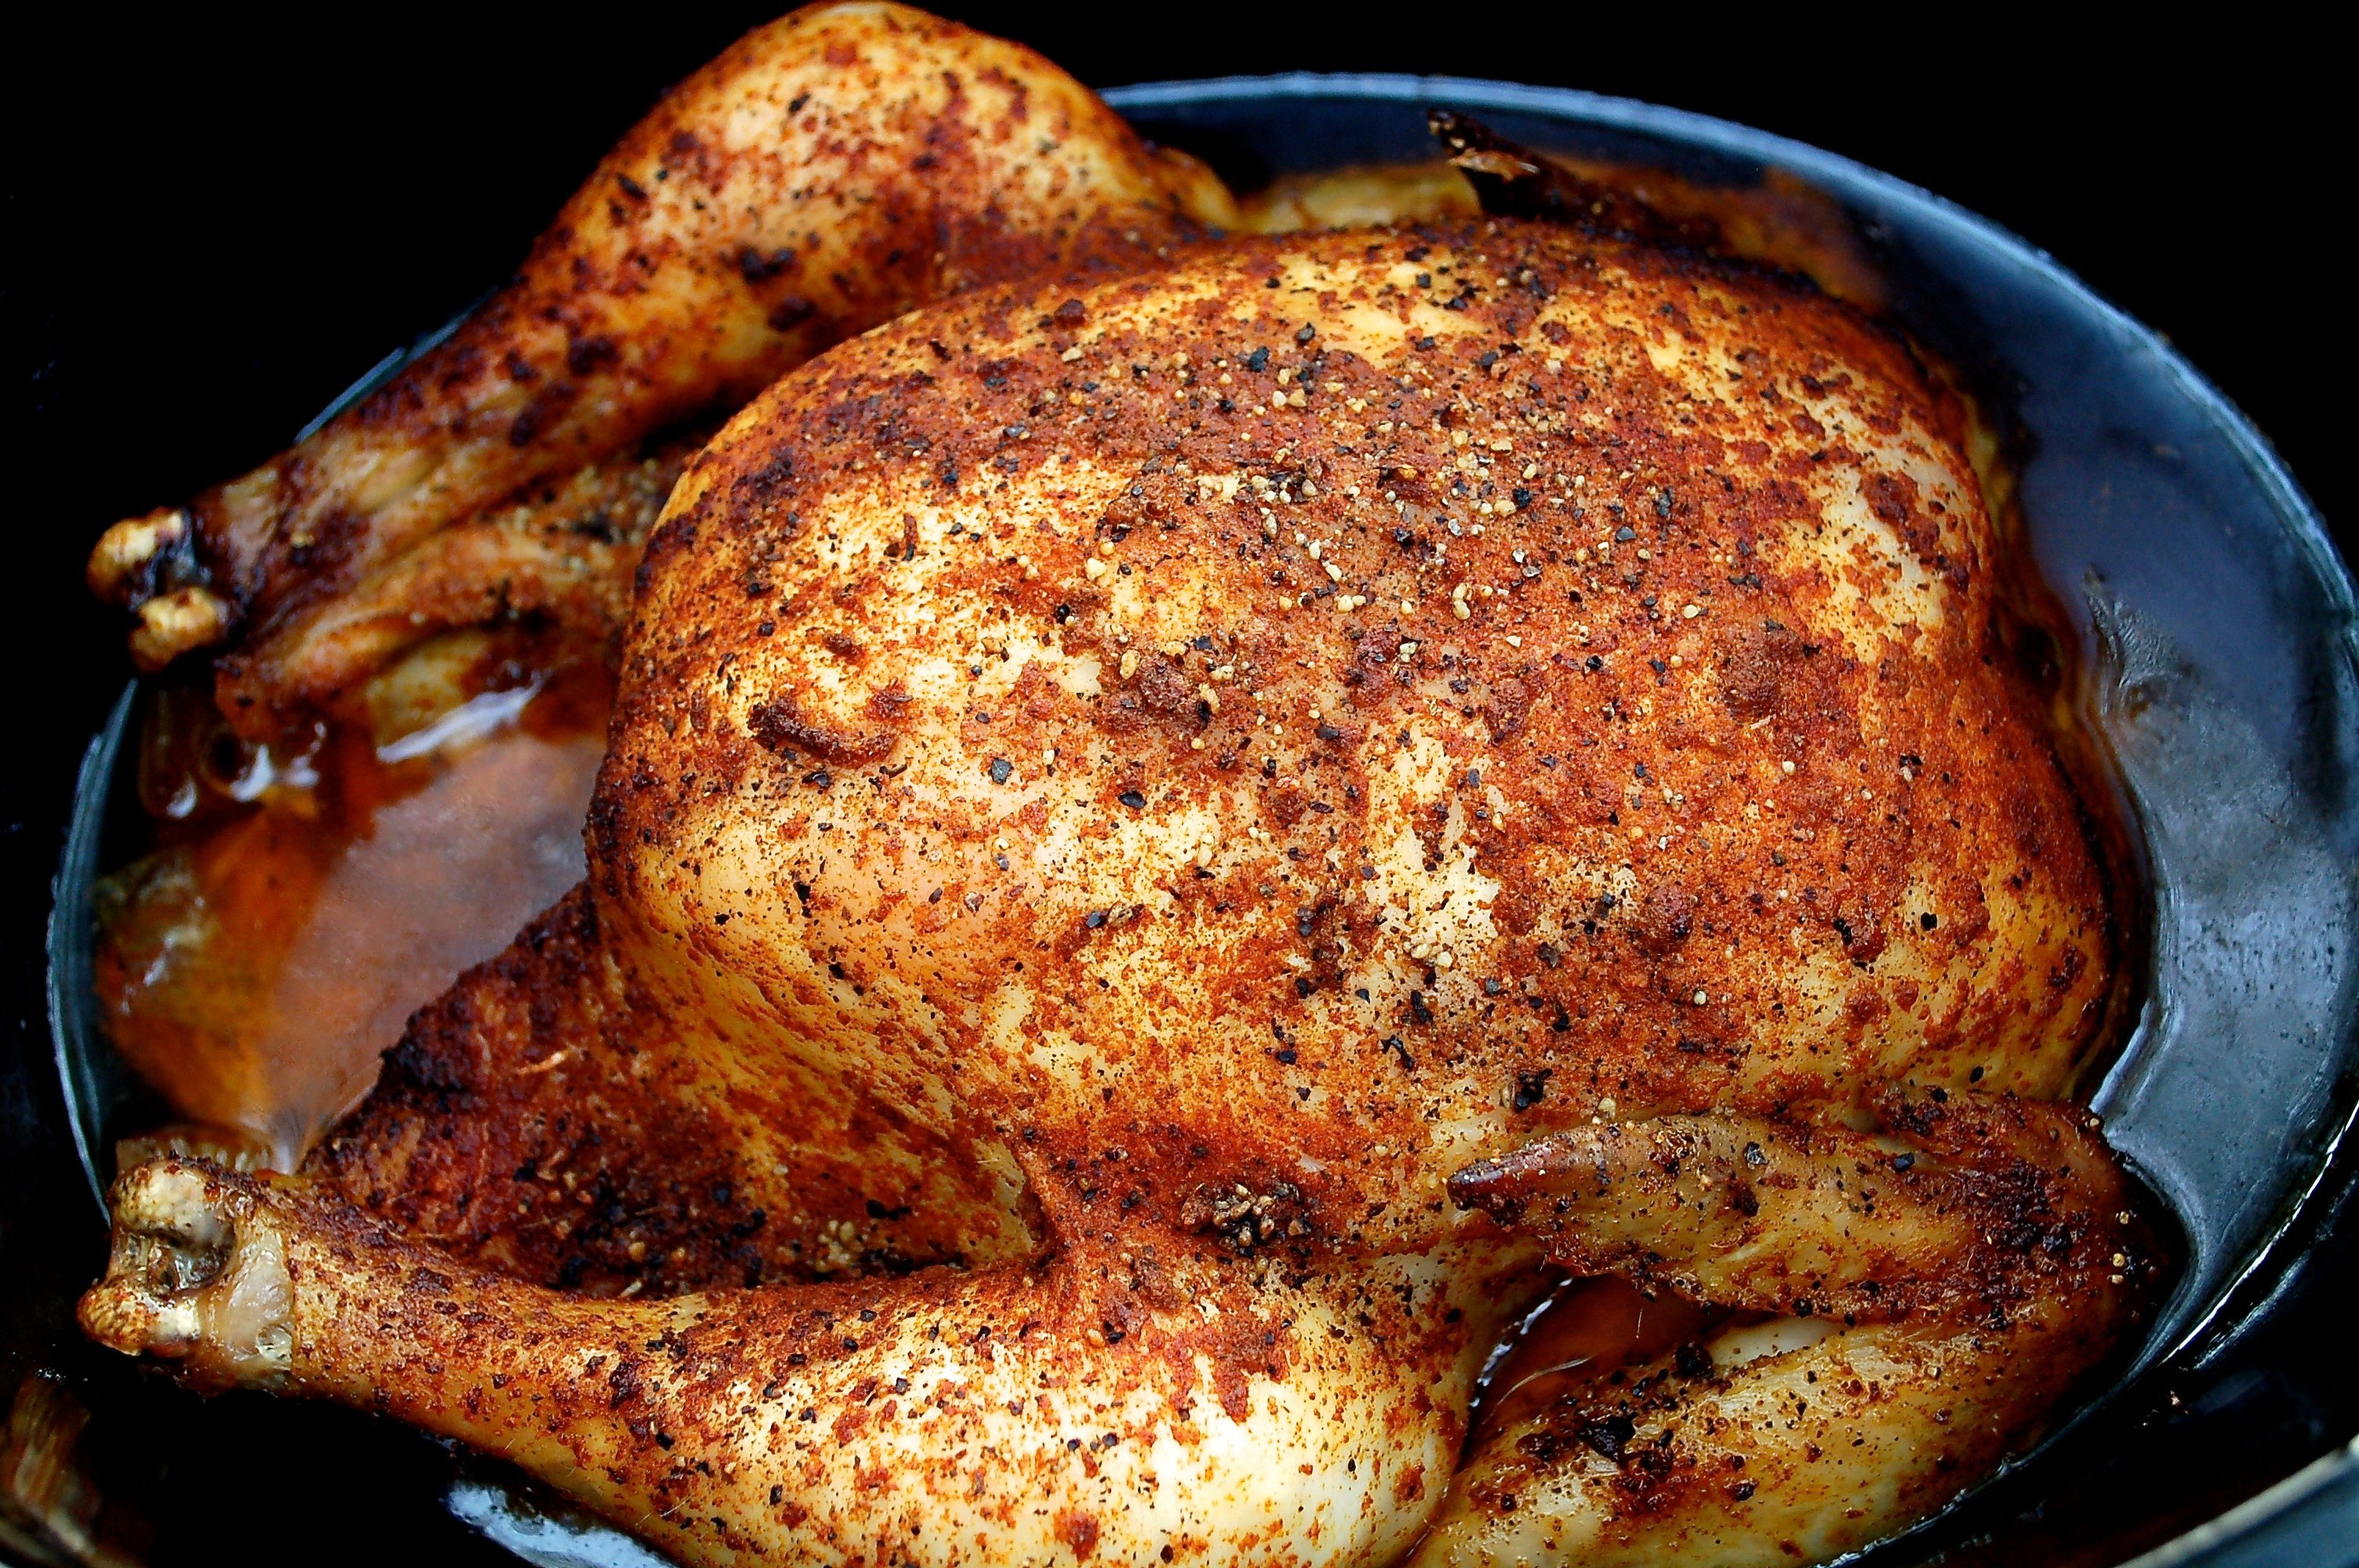 Cooking Whole Chicken In Crock Pot
 Easy Slow Cooker Whole Chicken The Slow Cooking Housewife